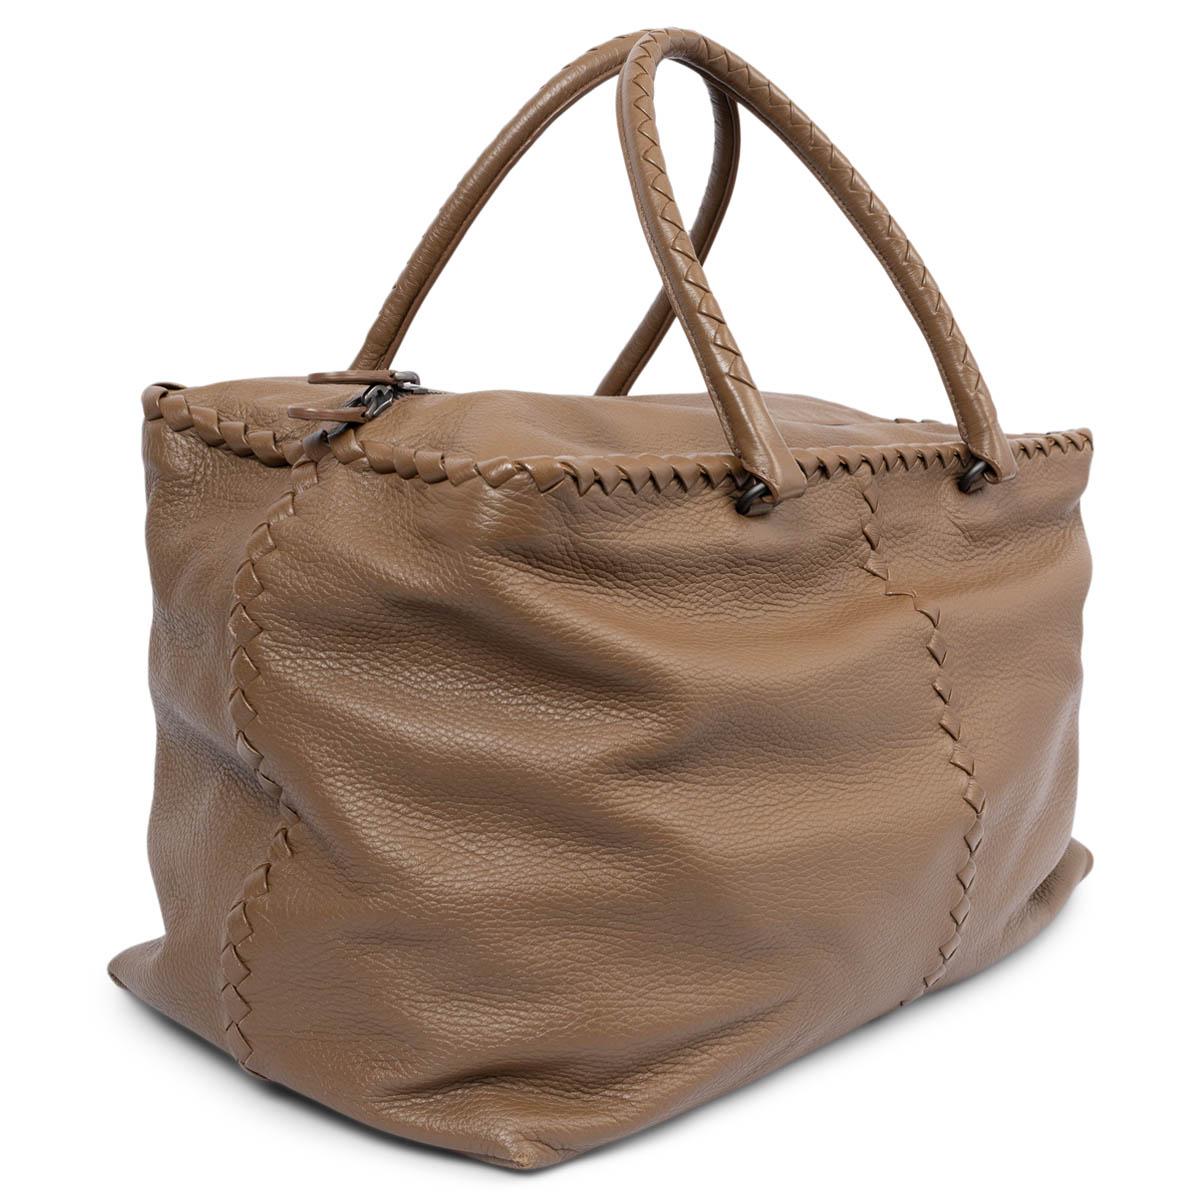 100% authentic Bottega Veneta Brick bag in mud brown deer skin leather with intrecciato trim. Closes with a zipper on top. Lined in taupe suede with an open pocket against the front and a zipper pocket against the back. Has been carried and shows